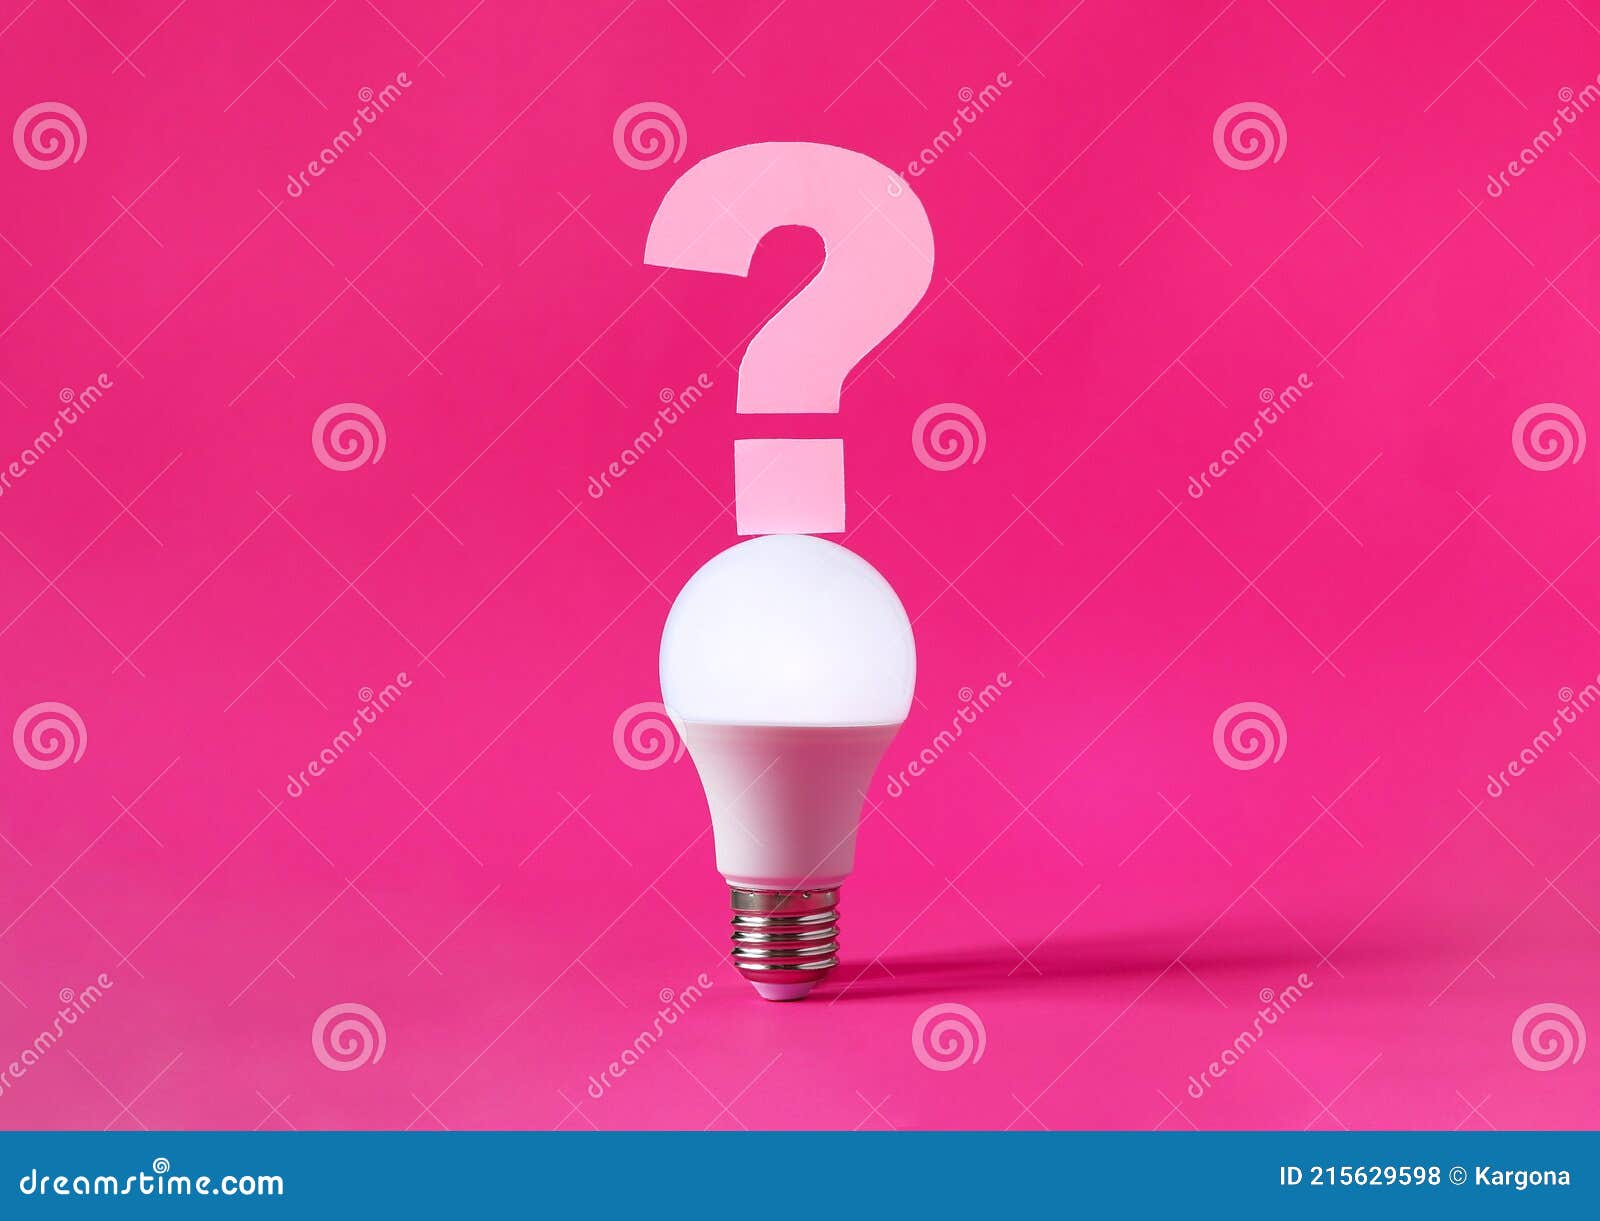 glowing light bulb with question mark on top of it on magenta background. question, searching for ideas concept